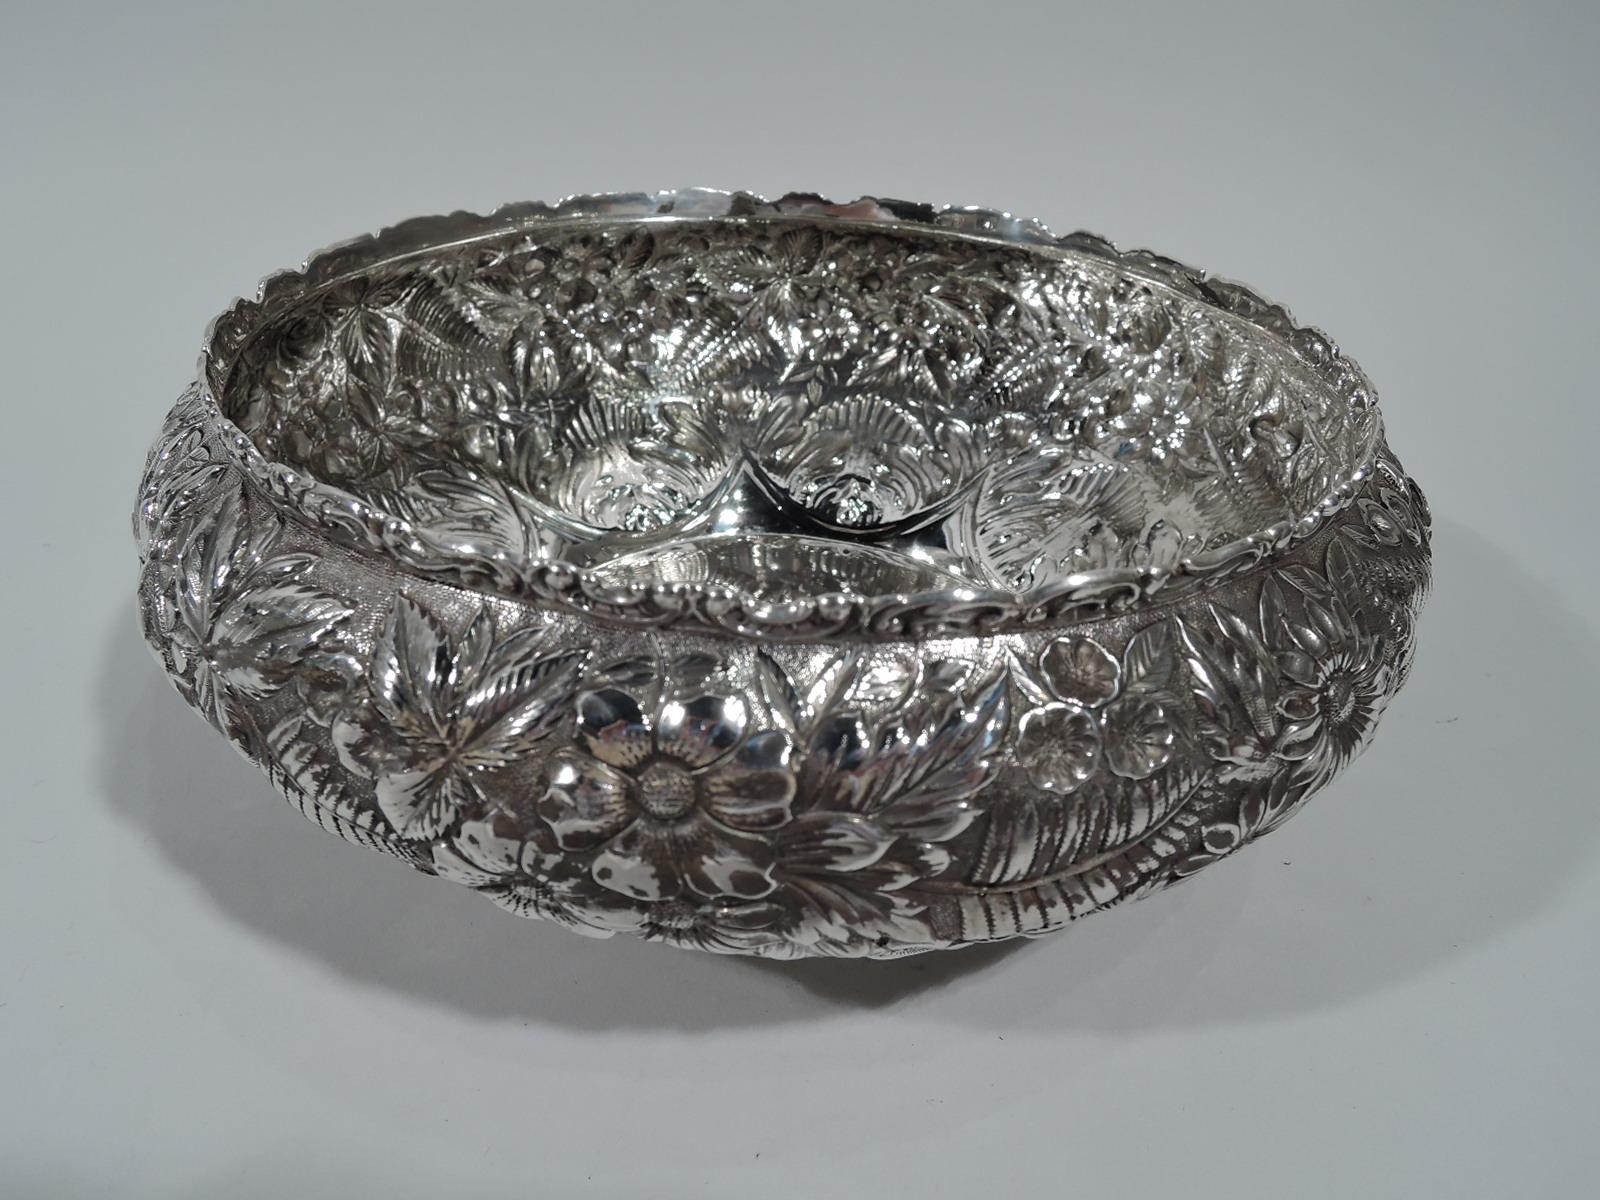 Beautiful repousse sterling silver bowl. Made by Jacobi & Jenkins in Baltimore, circa 1890. Plain circular well and curved sides with floral repousse on stippled ground: Pretty blooms and ferns are framed by plain 8-point star emanating from base.